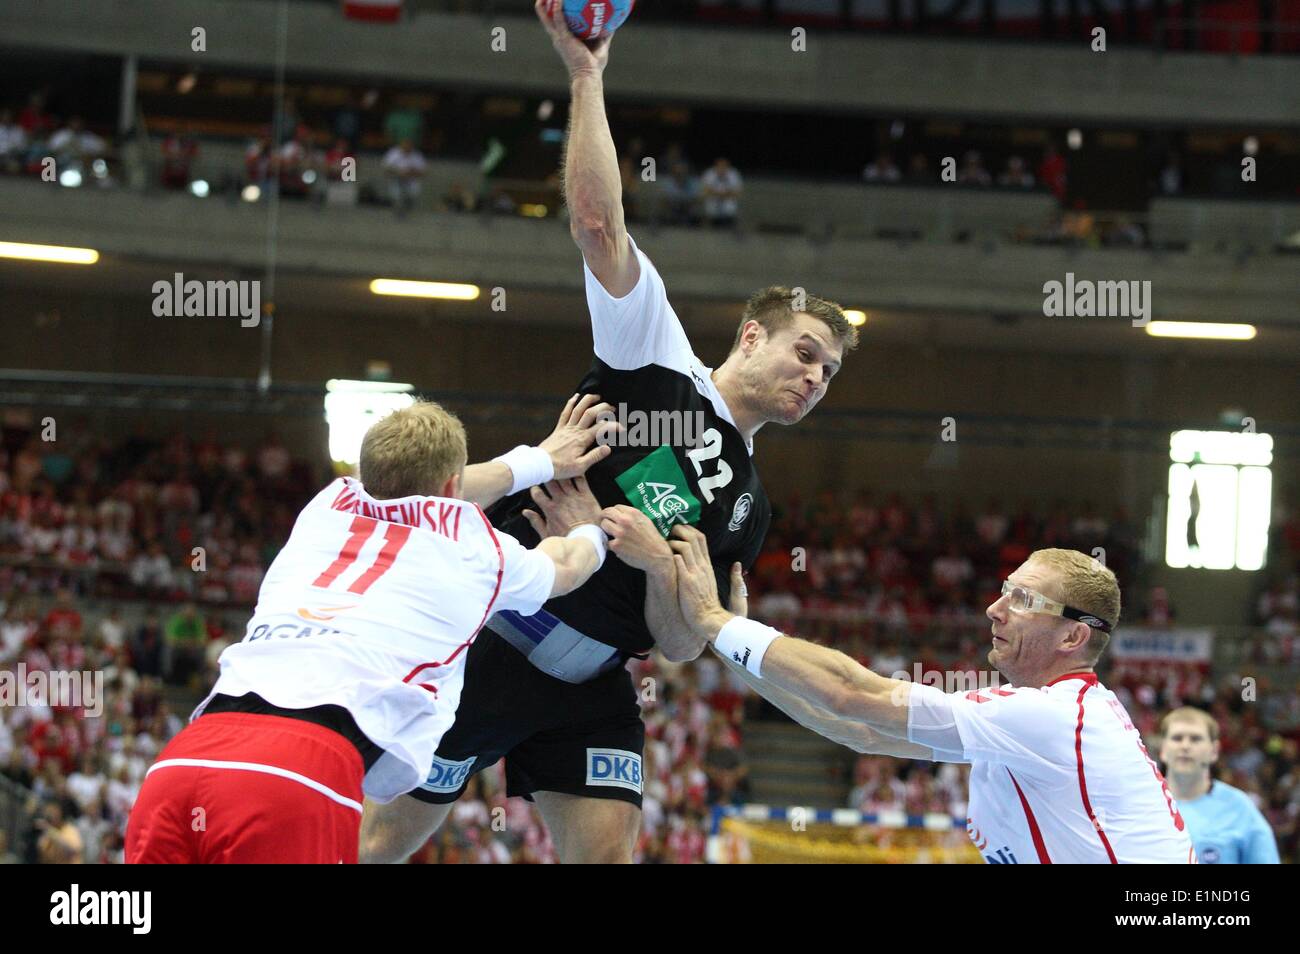 Gdansk, Poland 7th, June 2014 Quatar 2015 Men's World Handball Championship Play Off game between Poland and Germany at ERGO Arena sports hall. Michael Kraus (22) in action during the game. Credit:  Michal Fludra/Alamy Live News Stock Photo